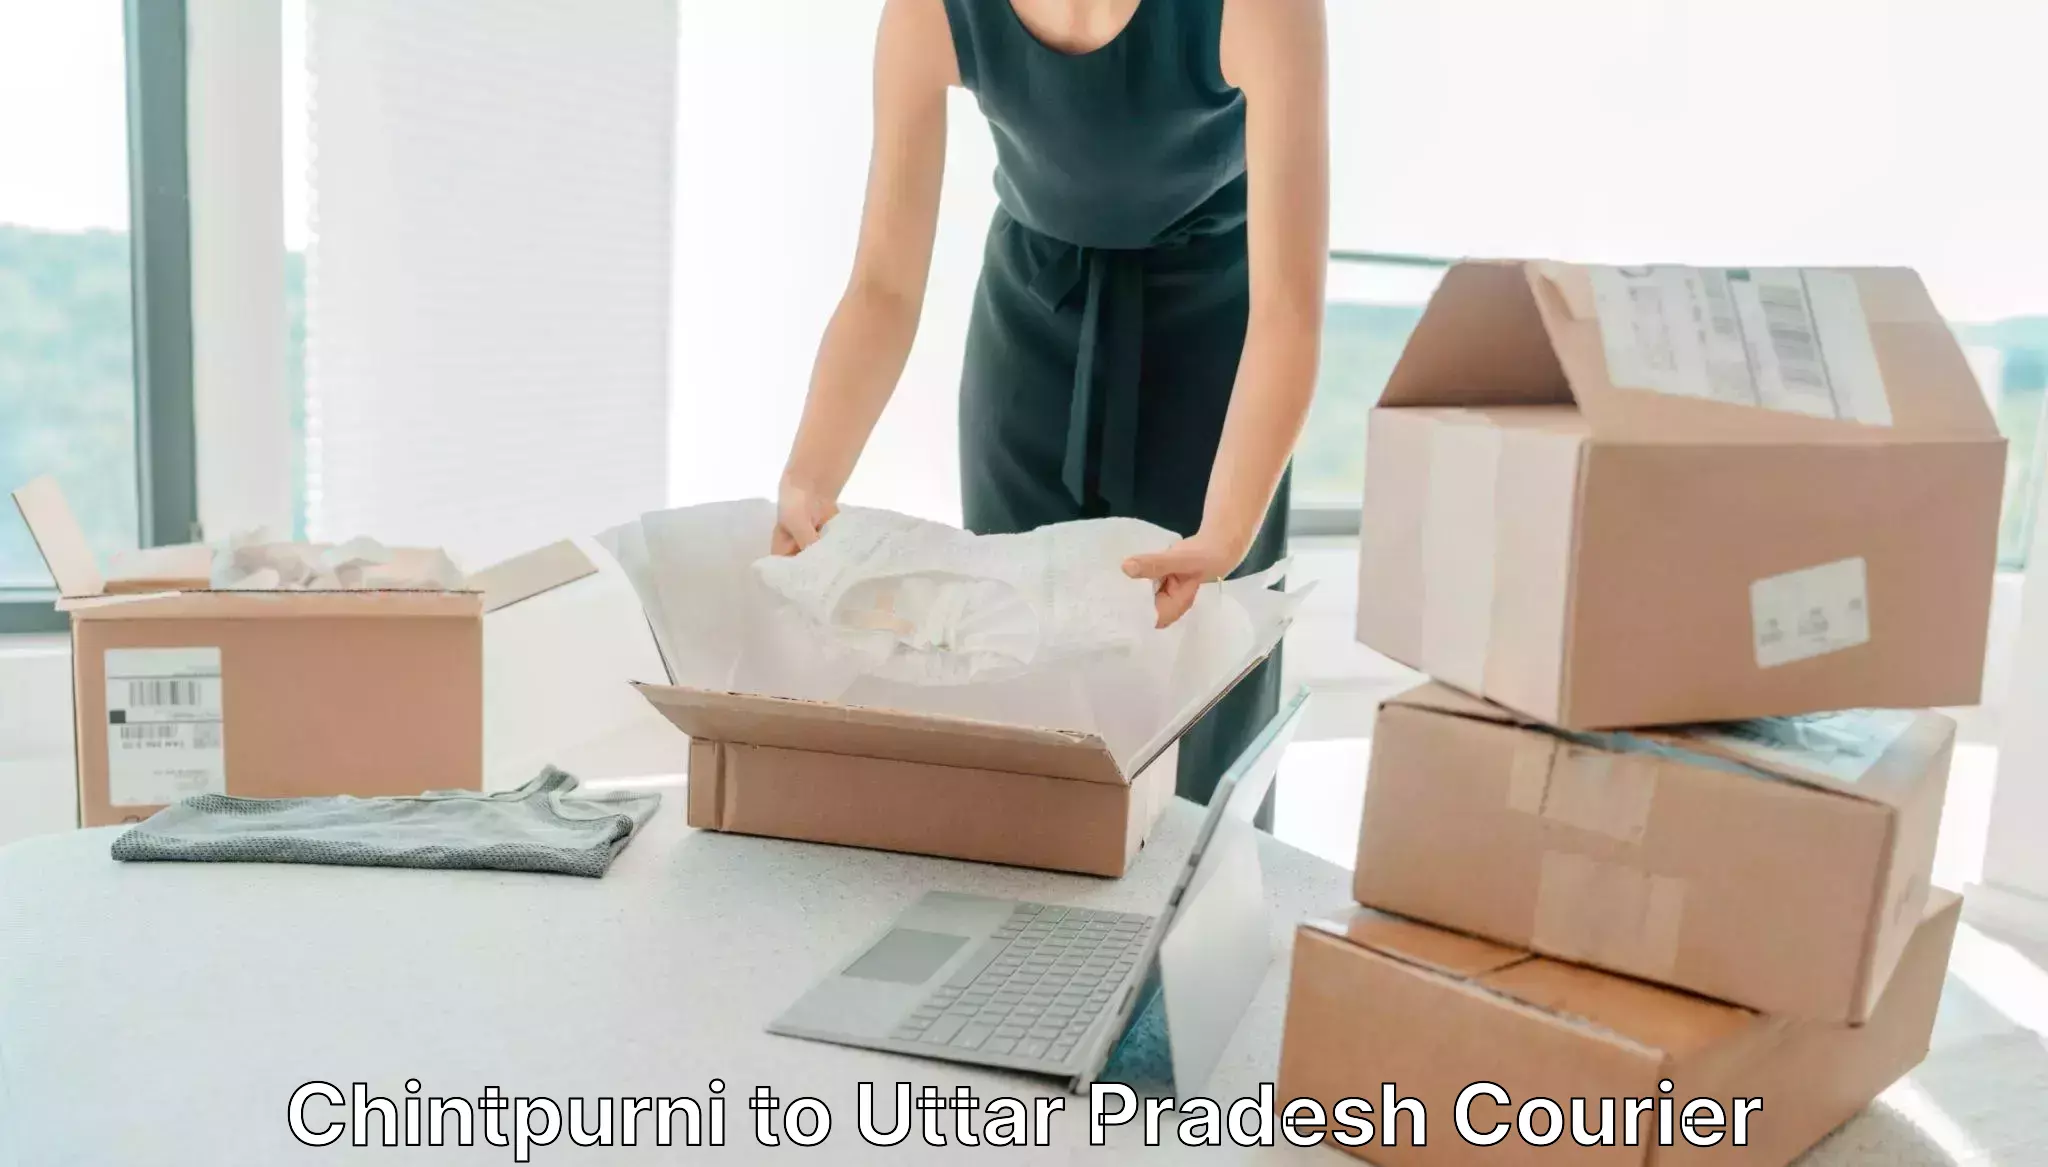 Small parcel delivery in Chintpurni to Sultanpur